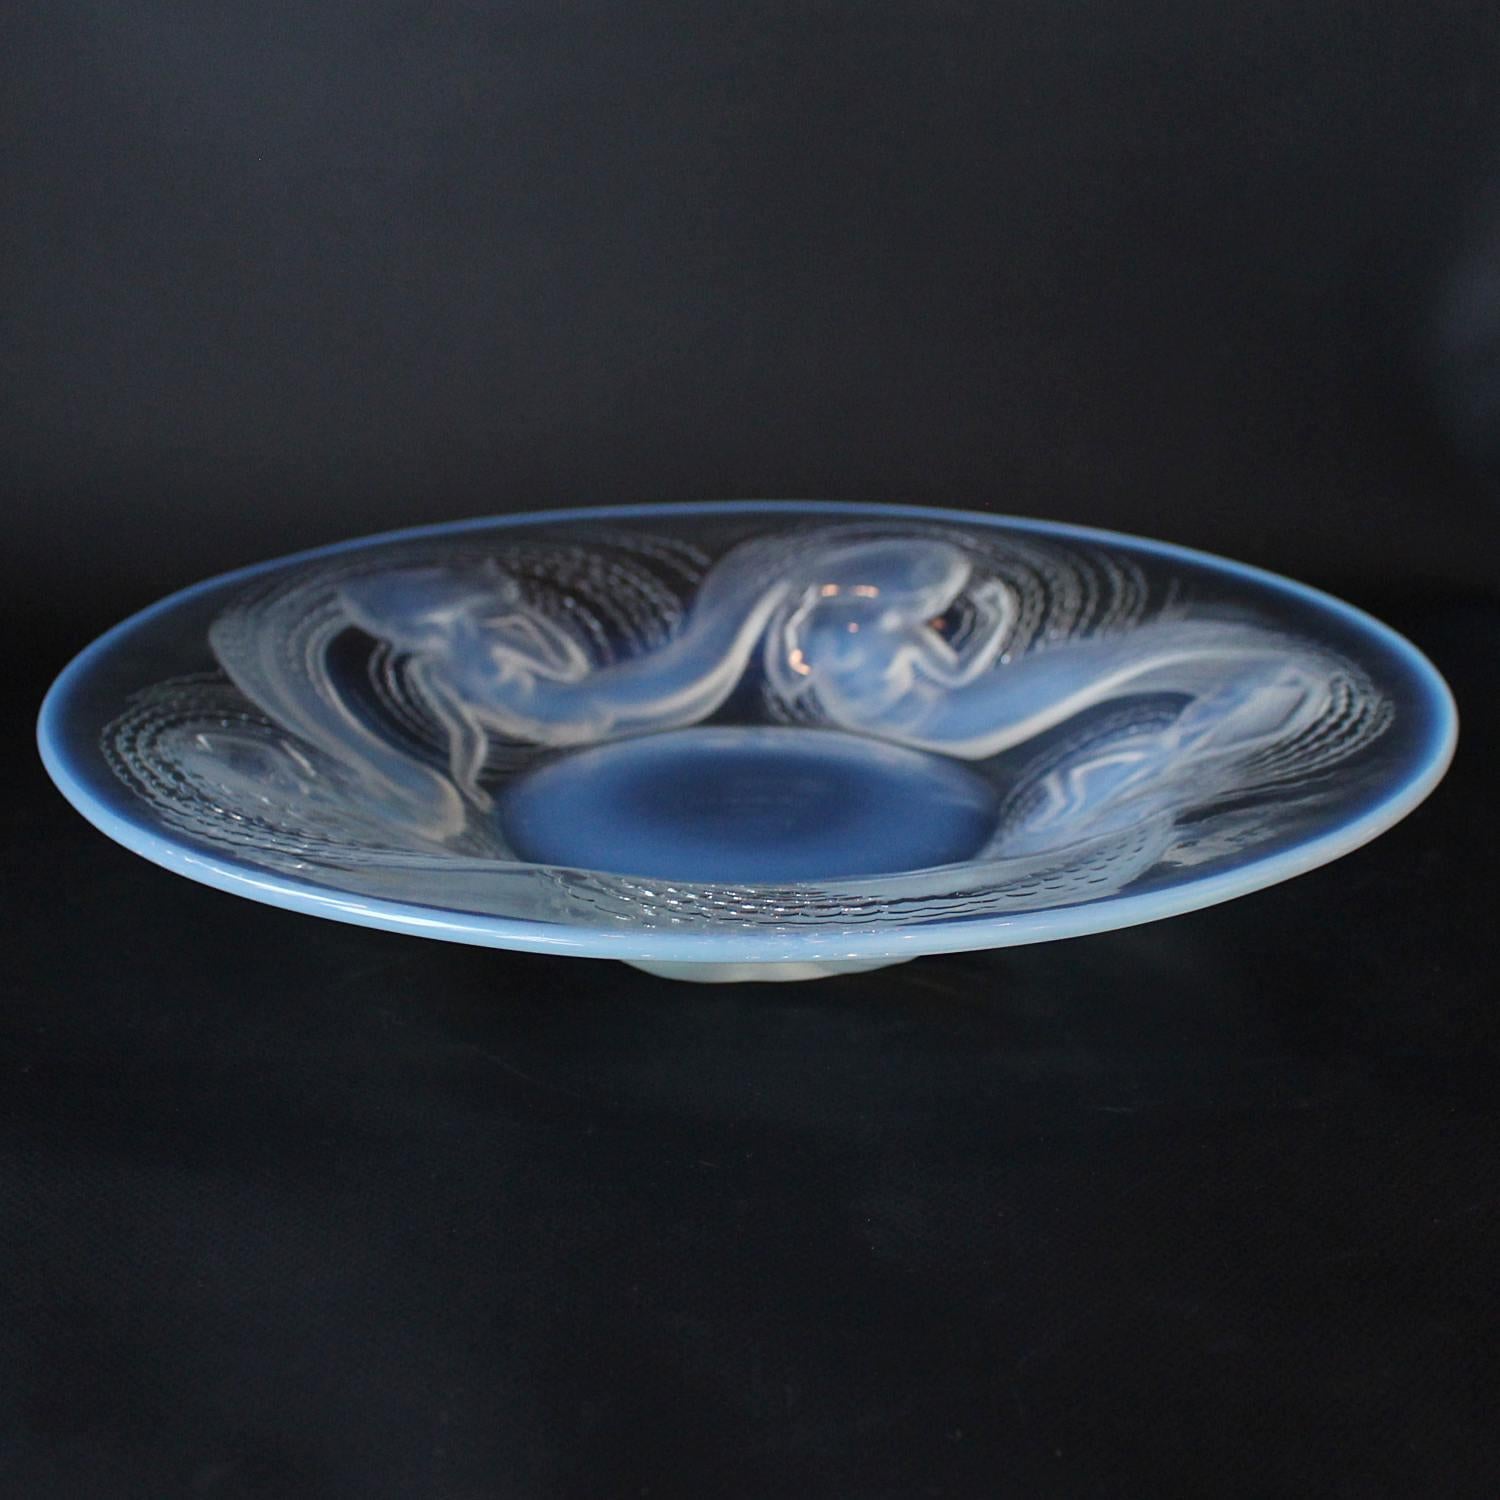 Calypso, an Art Deco, opalescent and clear glass coupe charger. Decorated with reverse raised swirling water nymphs. 

Stencil etched R Lalique France to underside.

Literature: Marcilhac Catalogue Raisonné de L'Œuvre de Verre